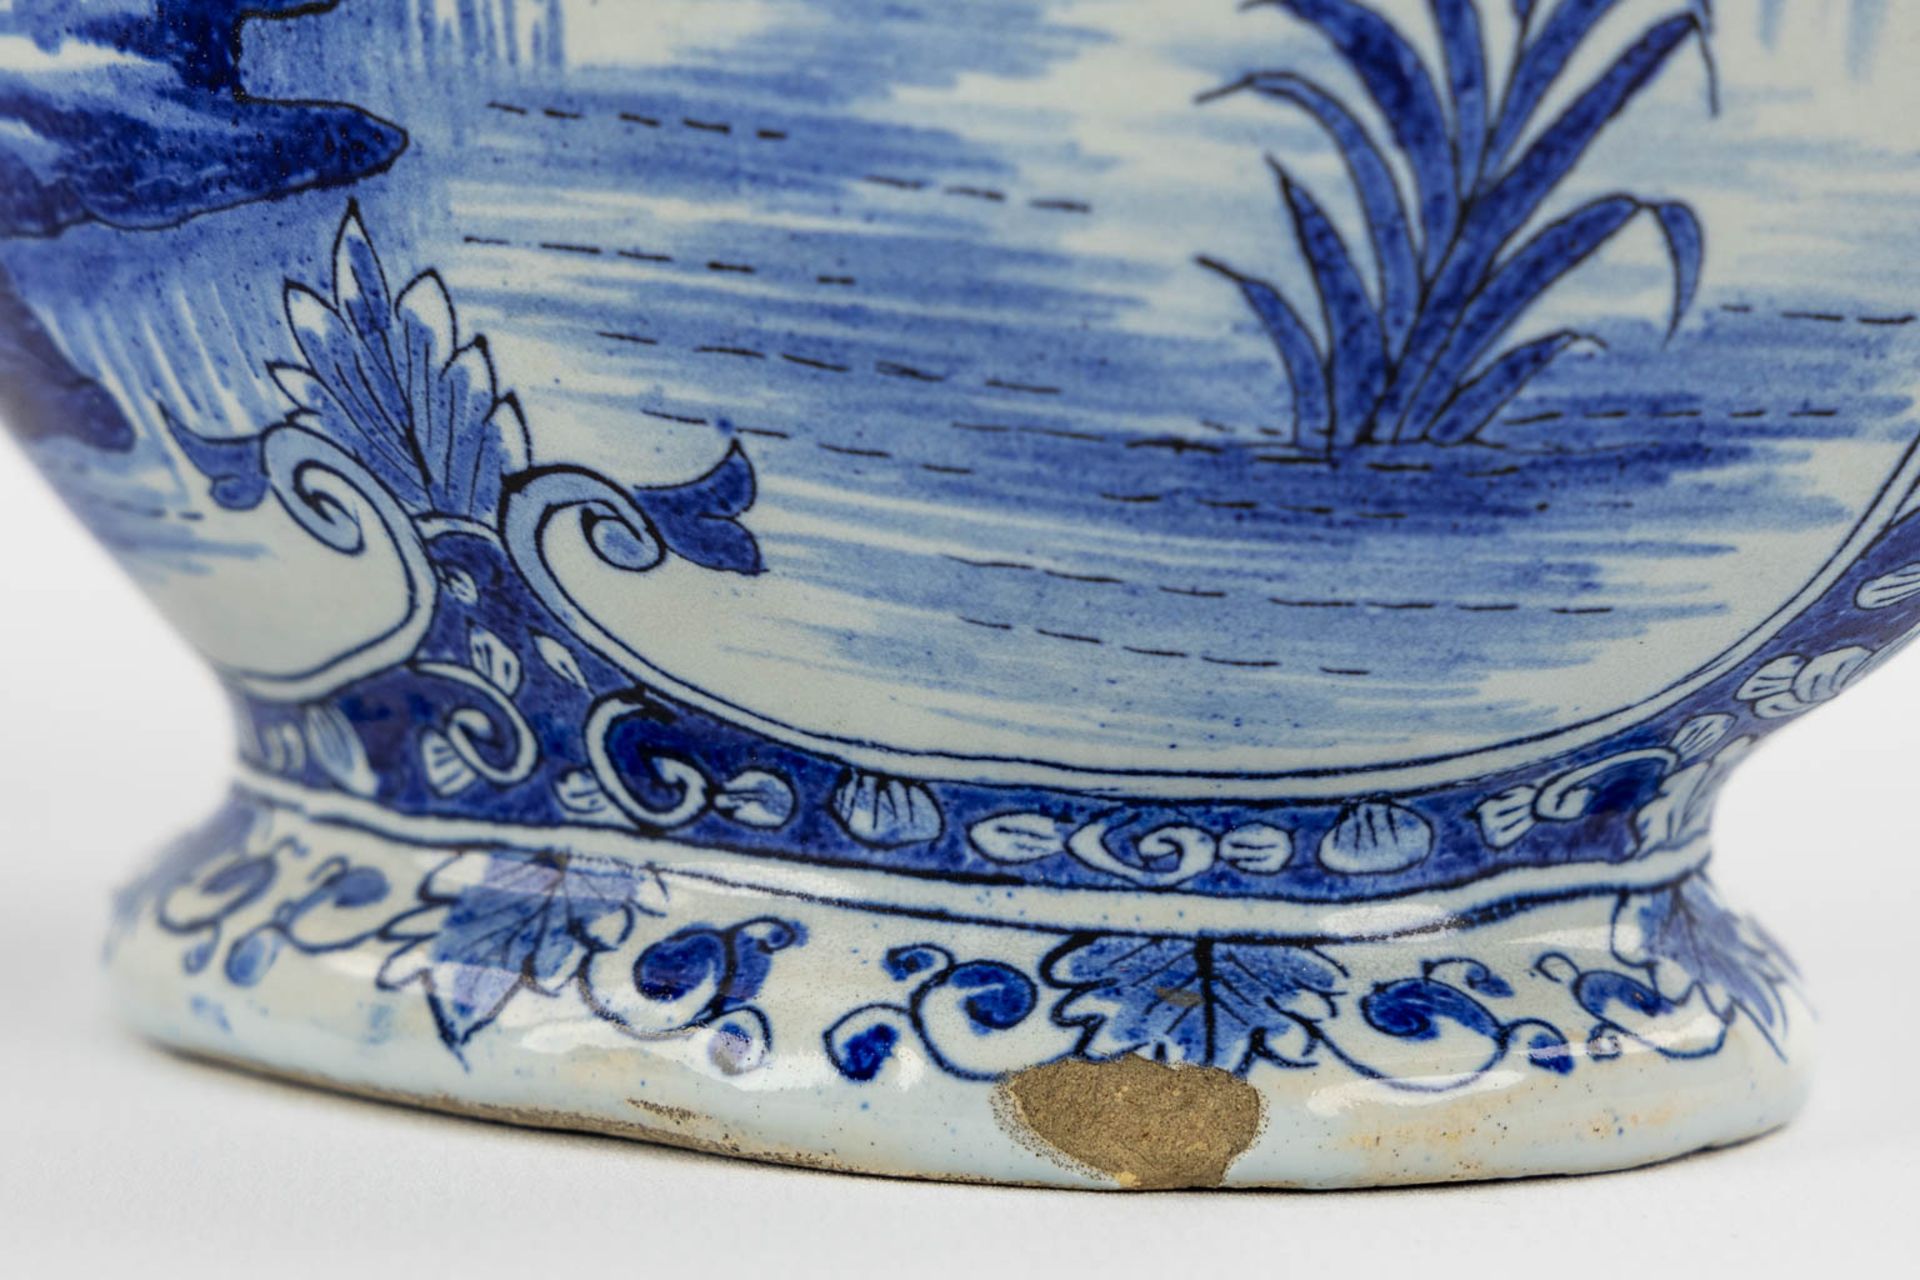 Geertrui Verstelle, Delft, a pair of vases with a landscape decor. Mid 18th C. (L:9 x W:14 x H:26,5 - Image 10 of 15